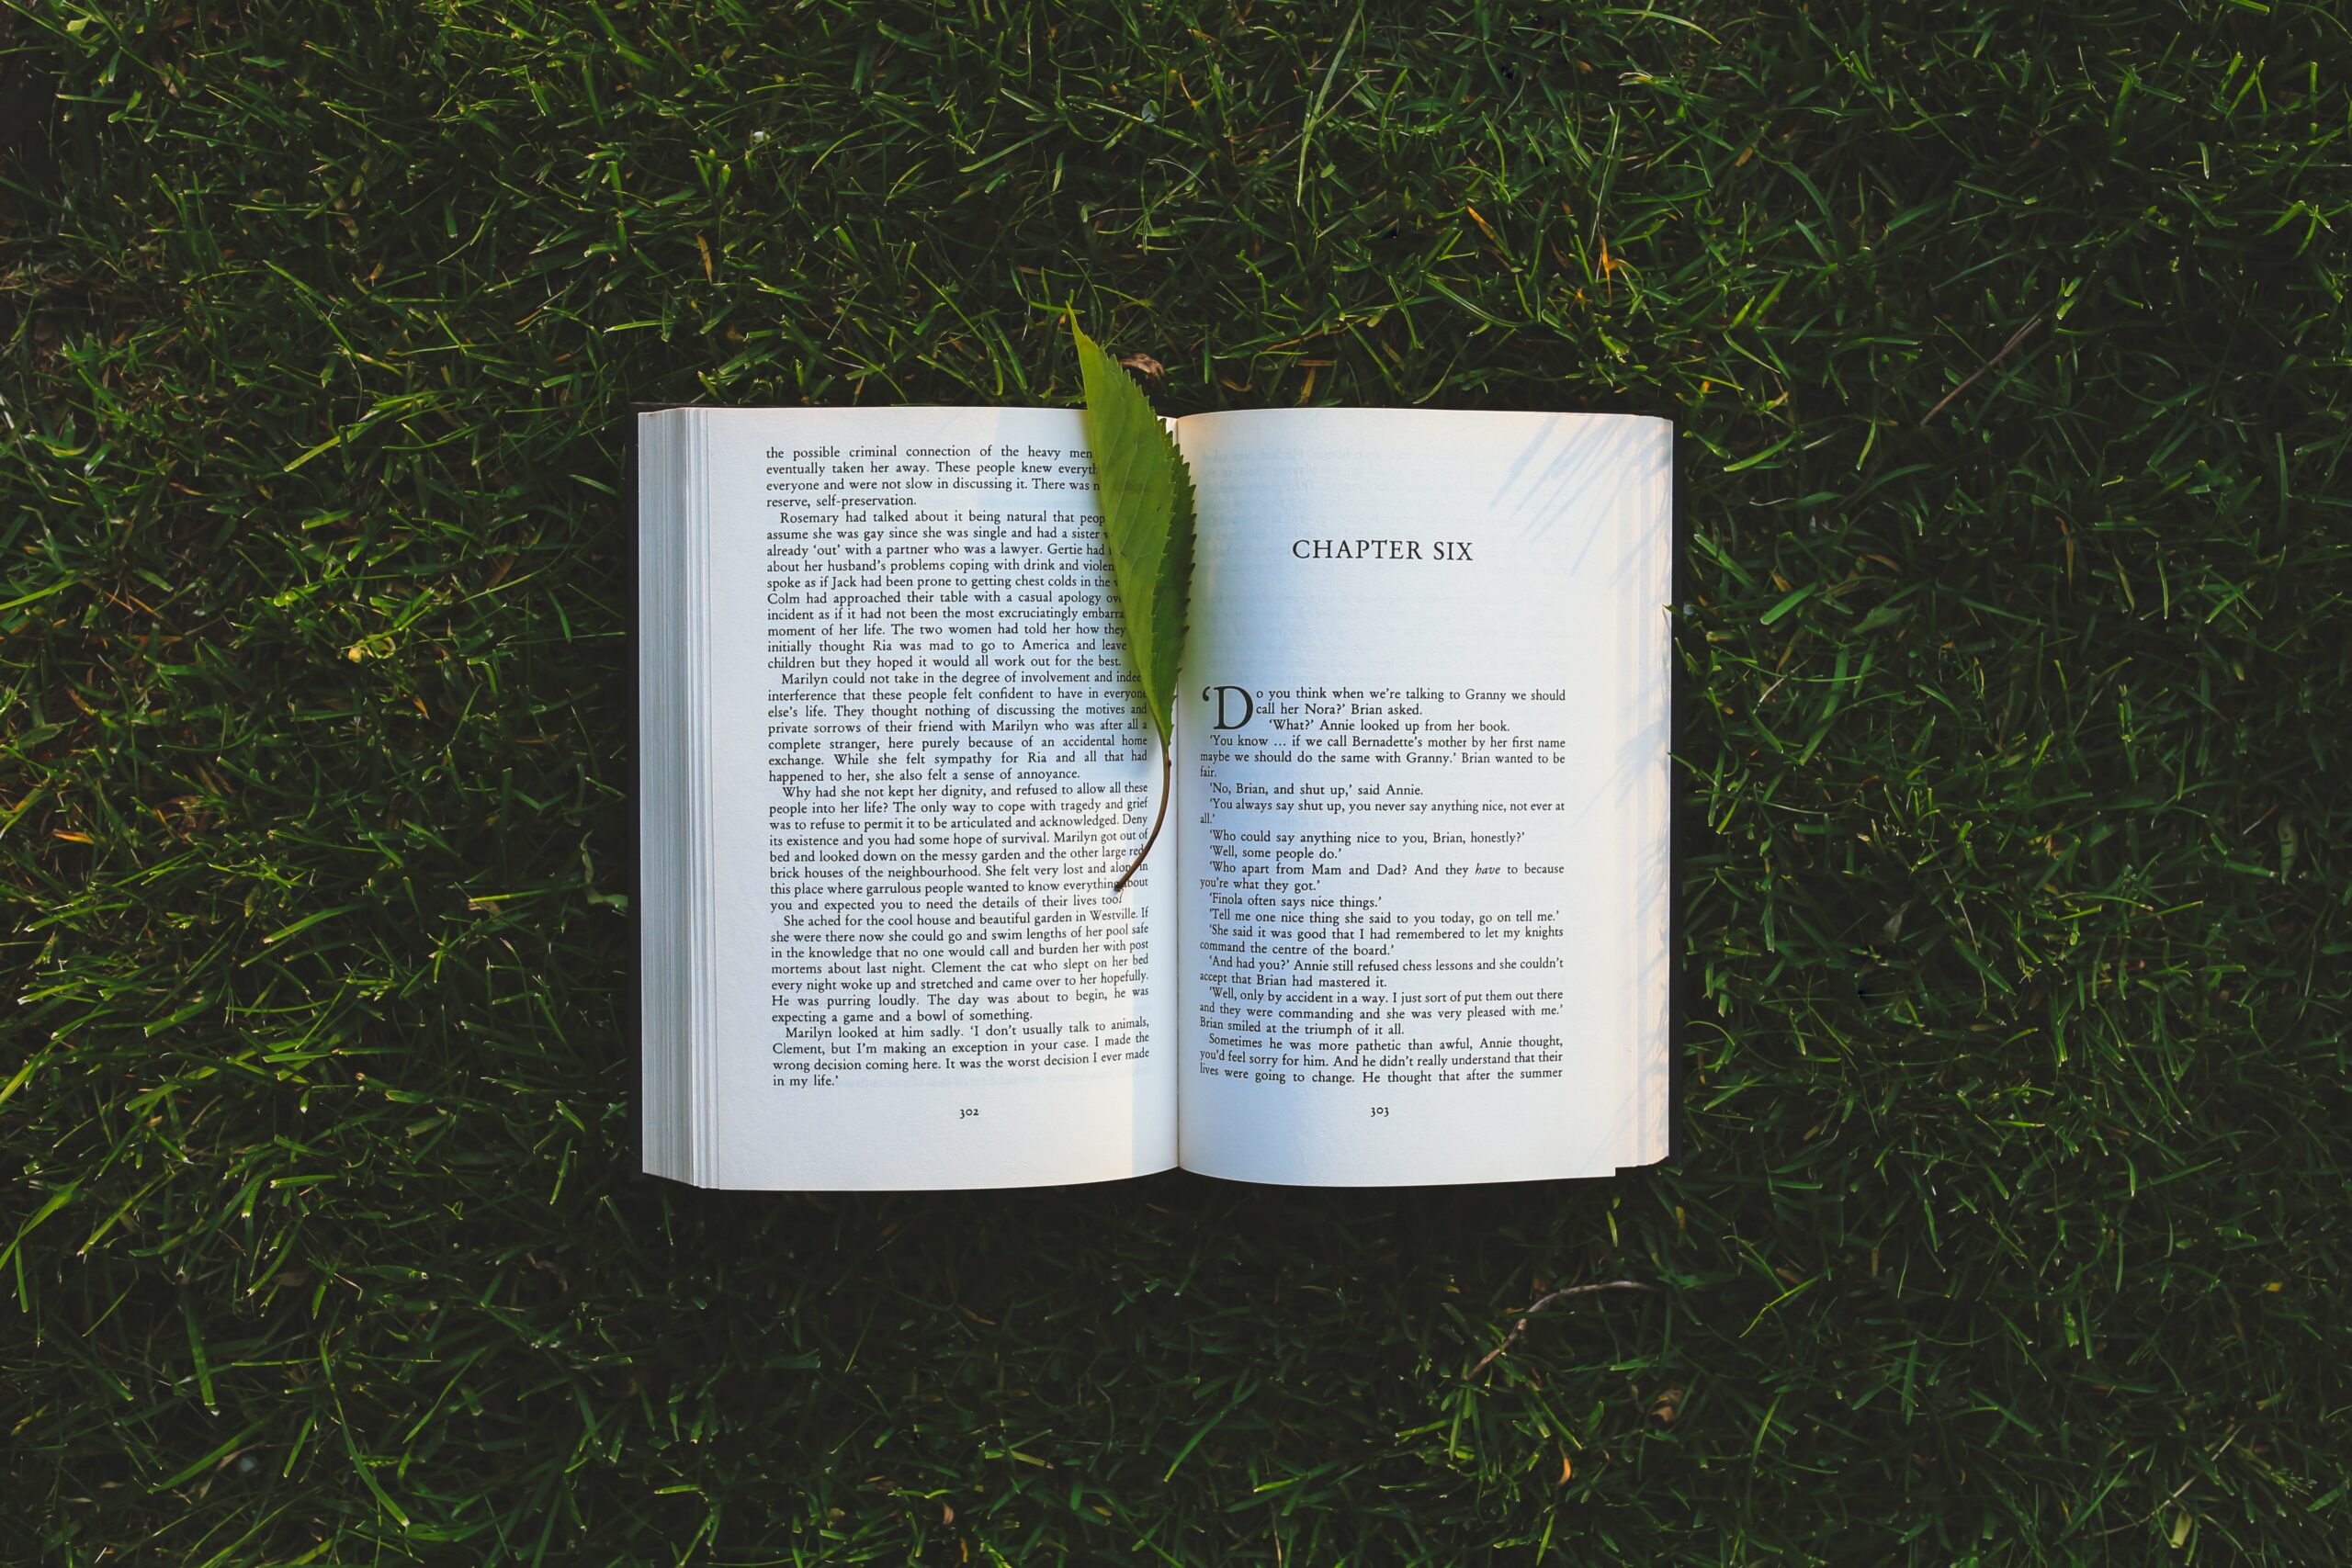 A book in the grass opened to "chapter six" with a leaf bookmark